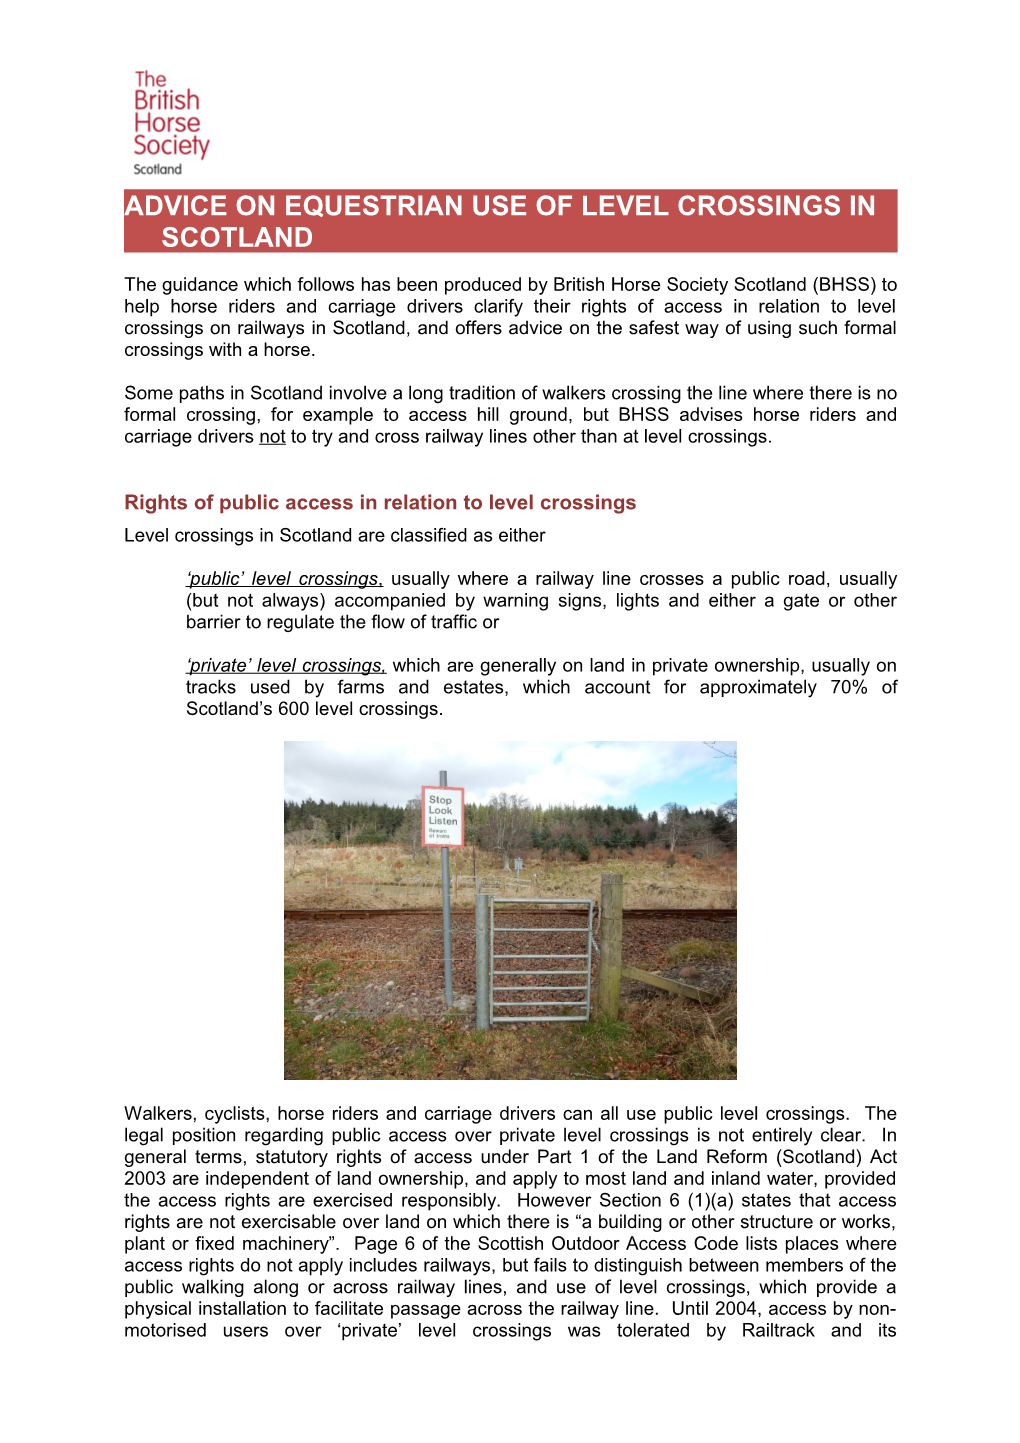 Advice on Equestrian Use of Level Crossings in Scotland